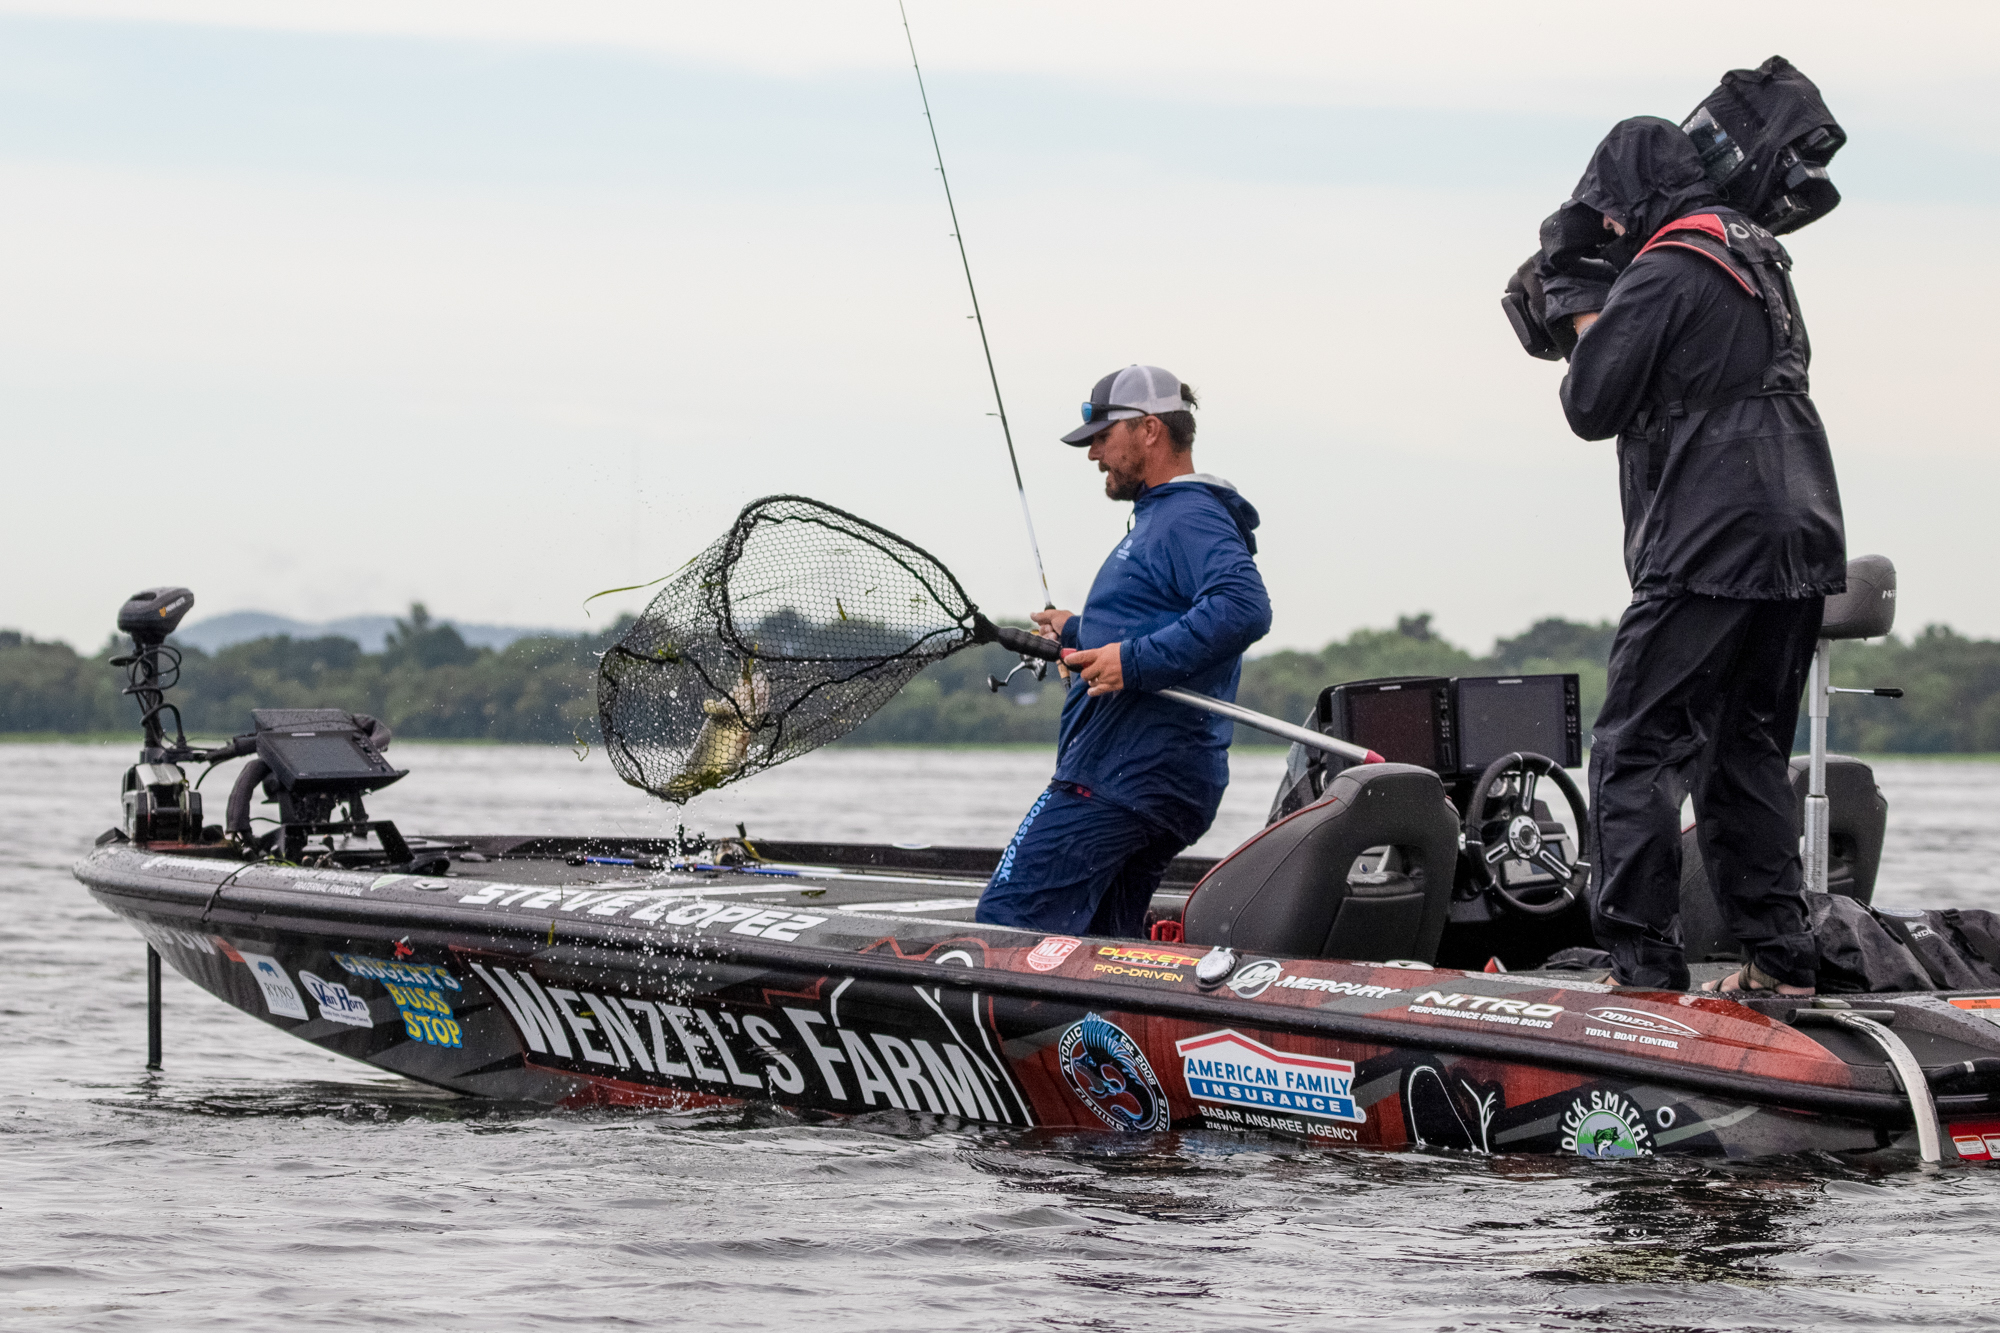 Oconomowoc's Lopez vaults to lead after rainy Day 2 of MLF Tackle Warehouse  Invitational Mercury Stop 6 at the Mississippi River in La Crosse - Major  League Fishing